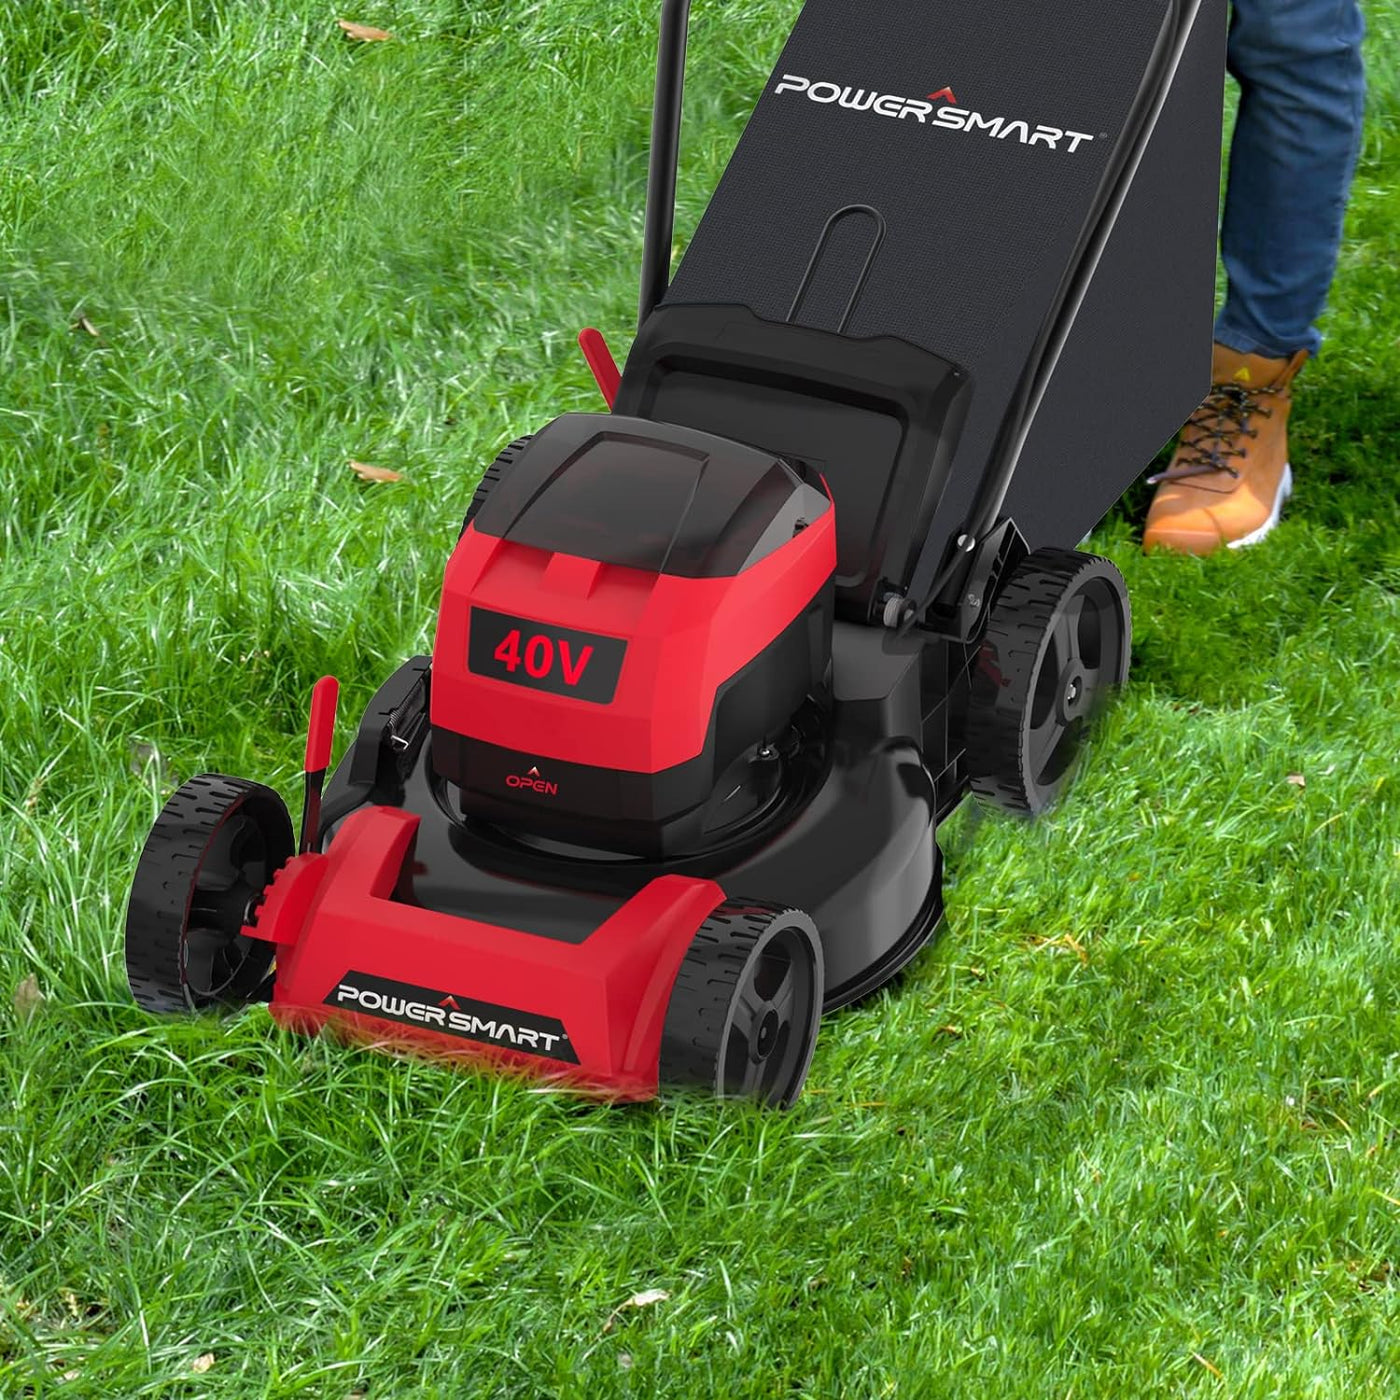 PowerSmart 40V MAX Cordless Lawn Mower Battery Powered with Bag (Lightly Used) - $150